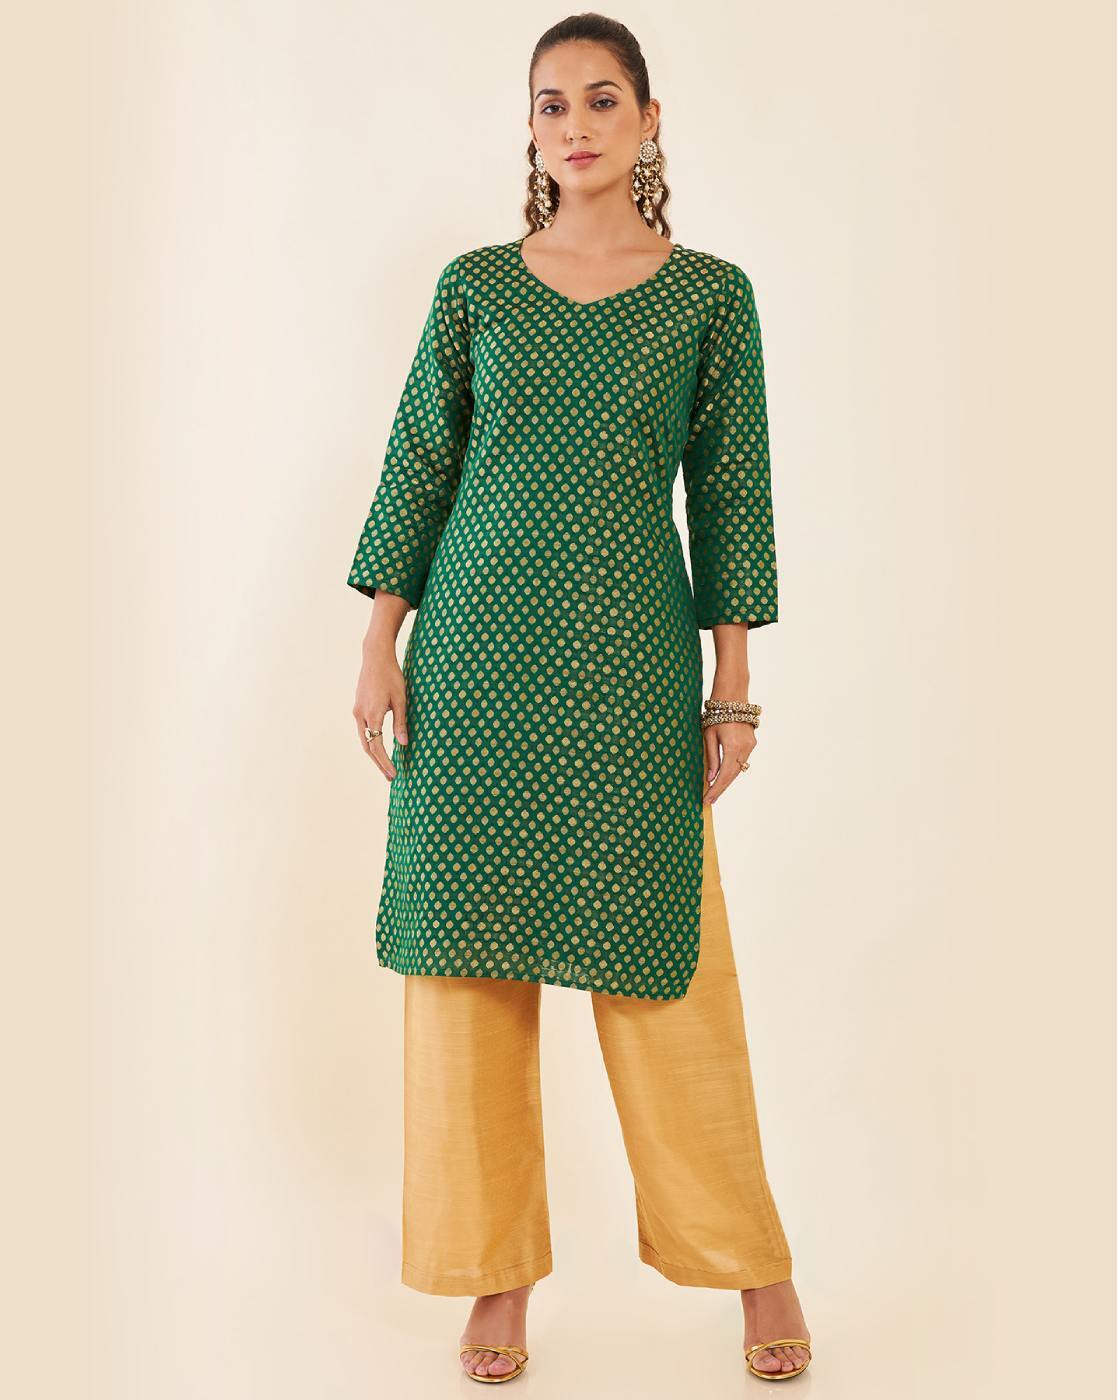 Soch Yellow Embroidered Unstitched Dress Material